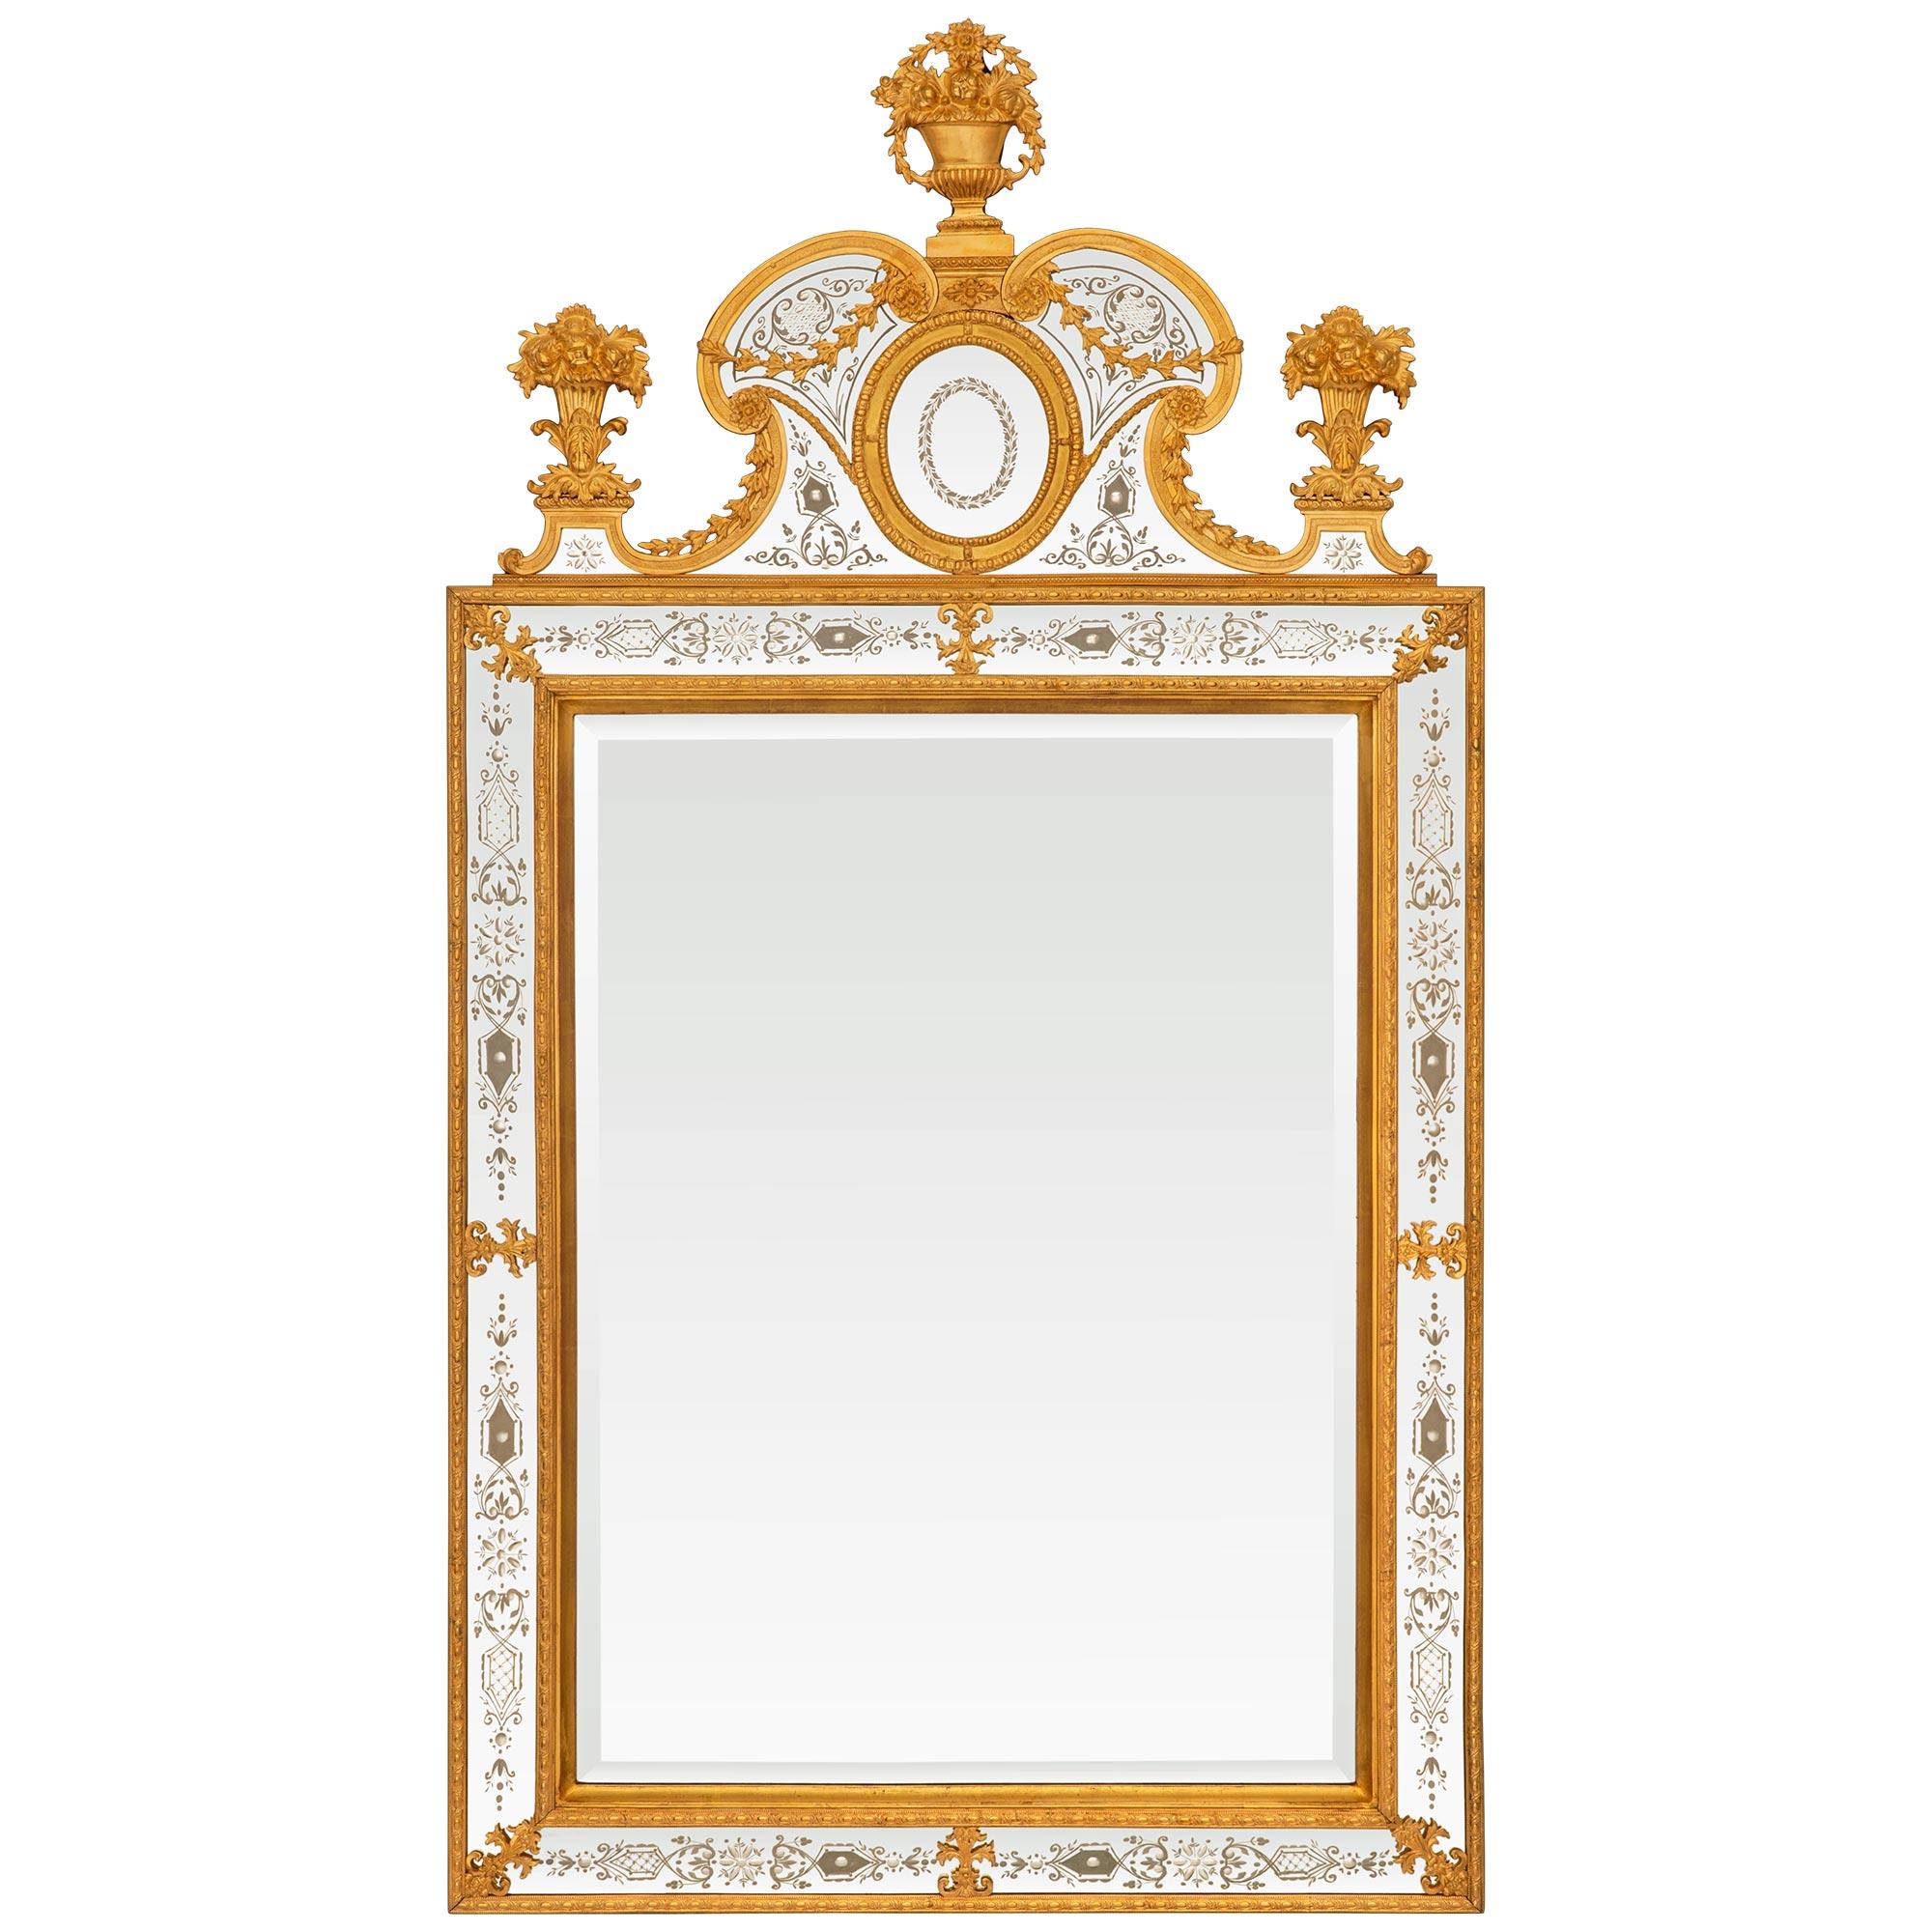 Swedish 19th Century Neo-Classical St. Etched Giltwood And Ormolu Mirror For Sale 4